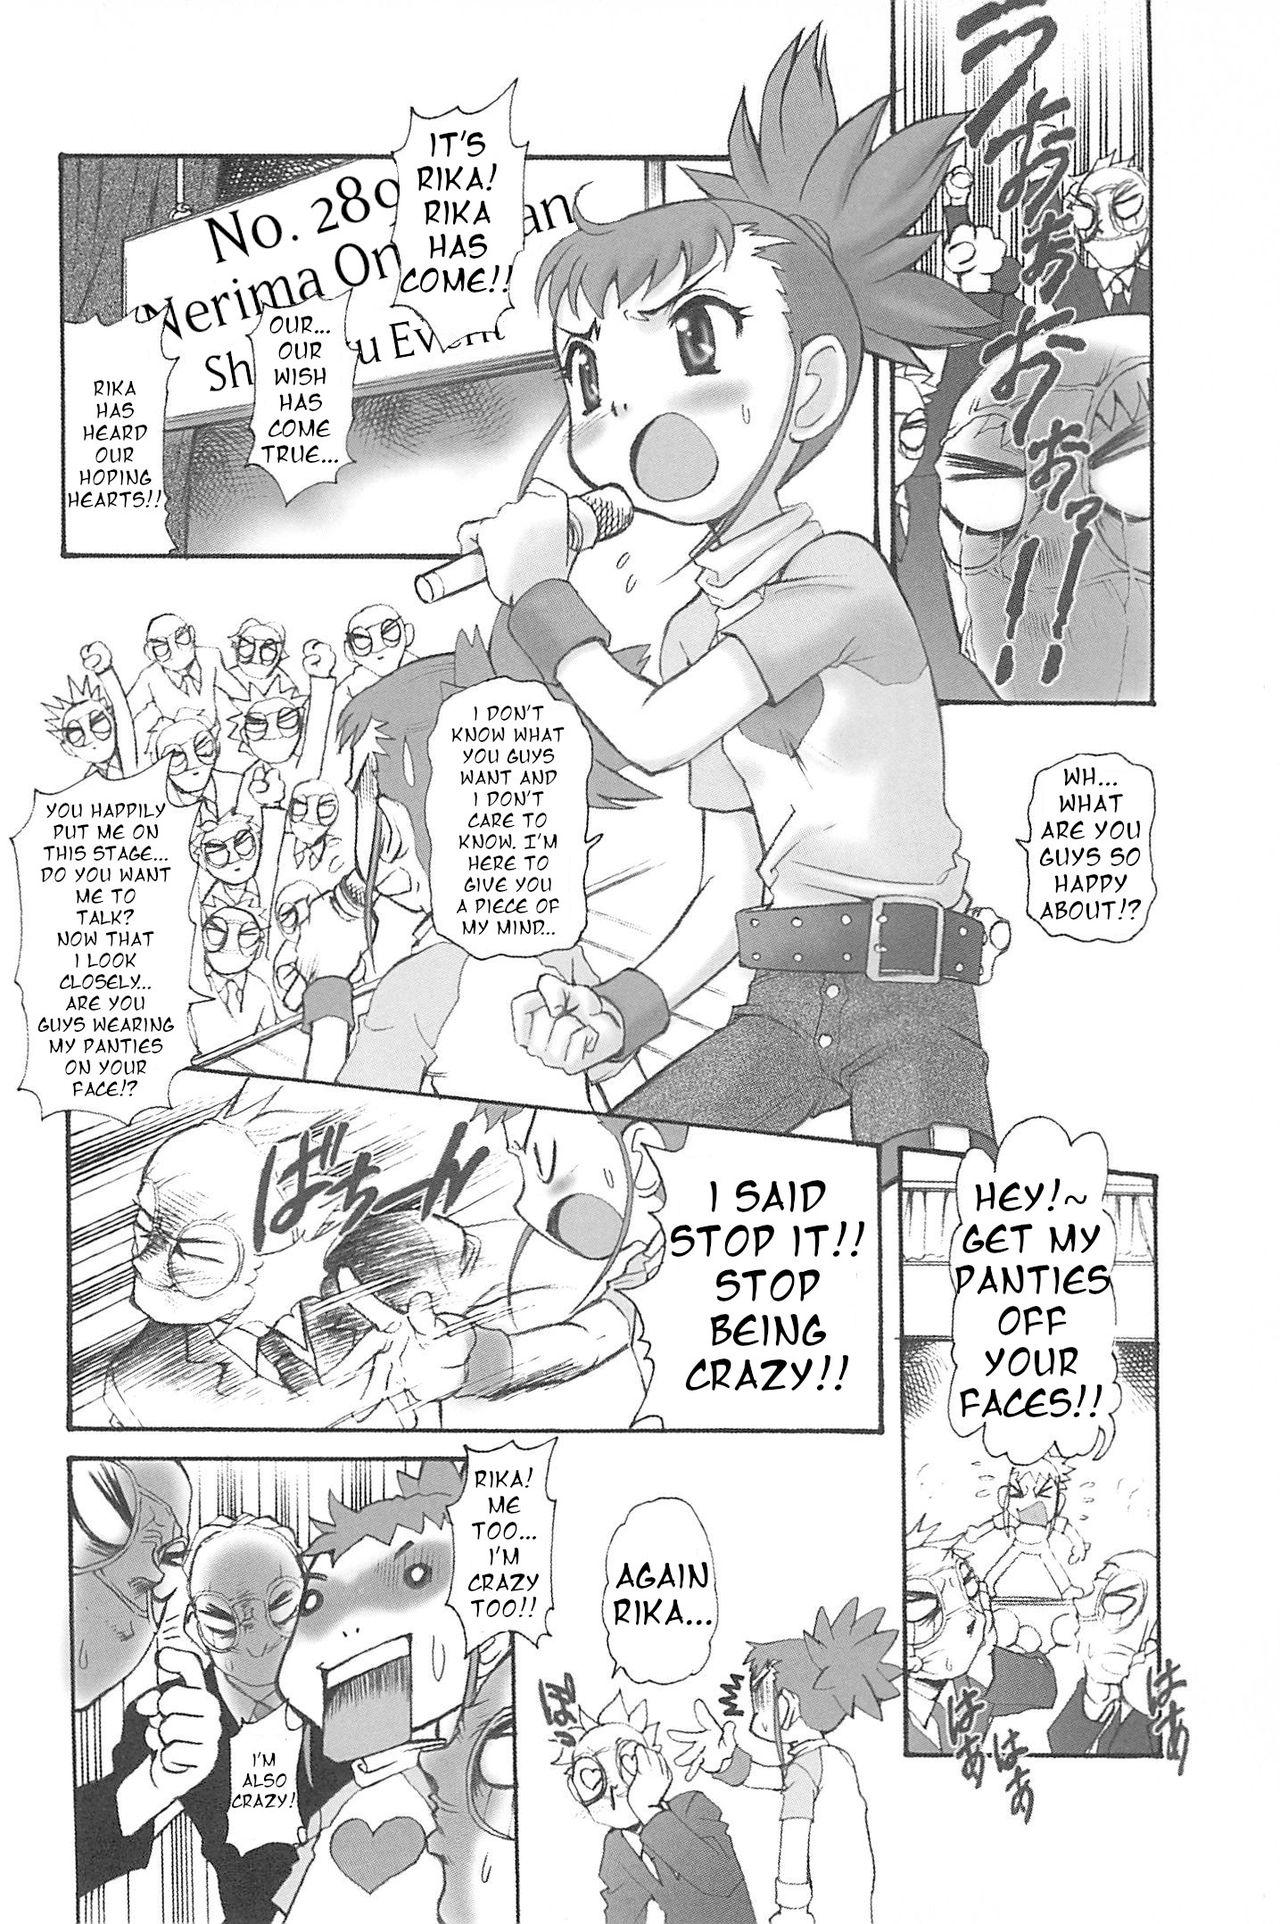 Horny Slut Cranial Business Trip! Nerima's Onii-chan!! - Digimon Digimon tamers Jerk Off - Page 2